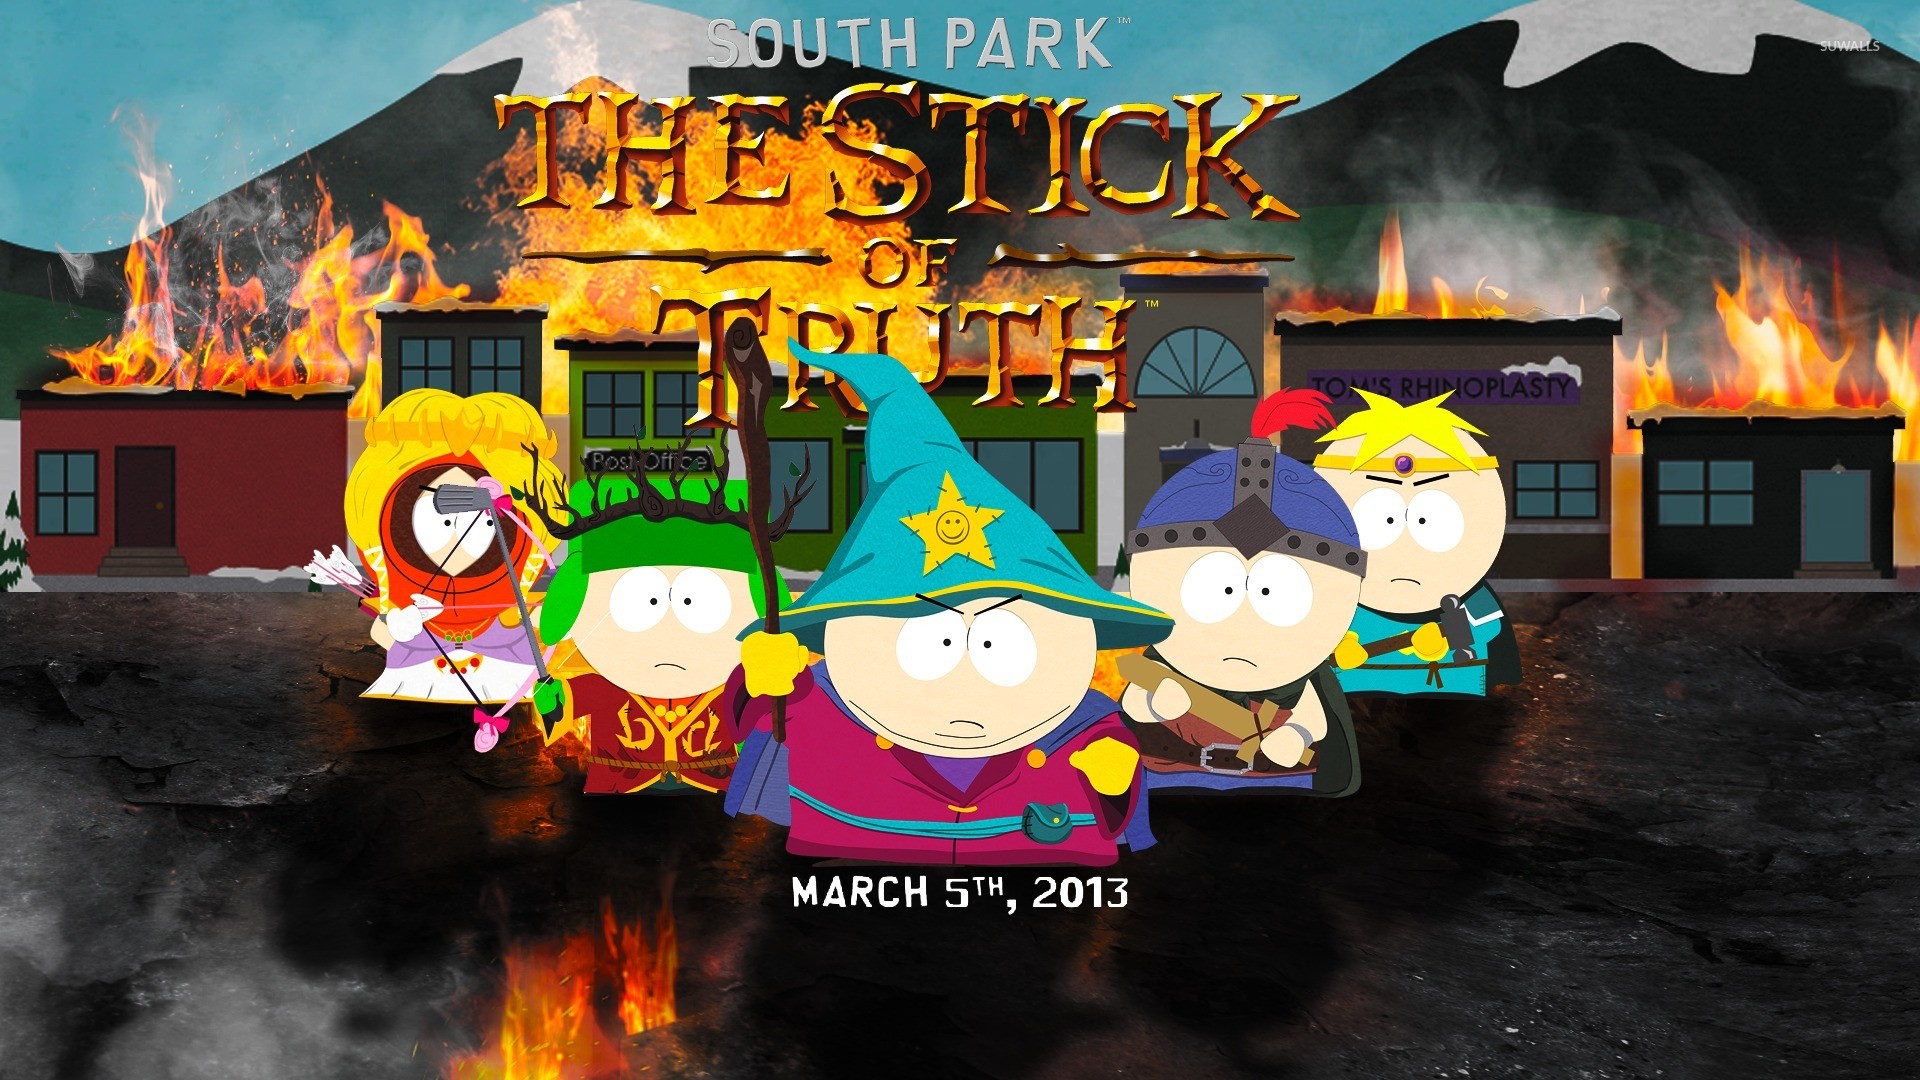 1920x1080 South Park - The Stick of Truth wallpaper